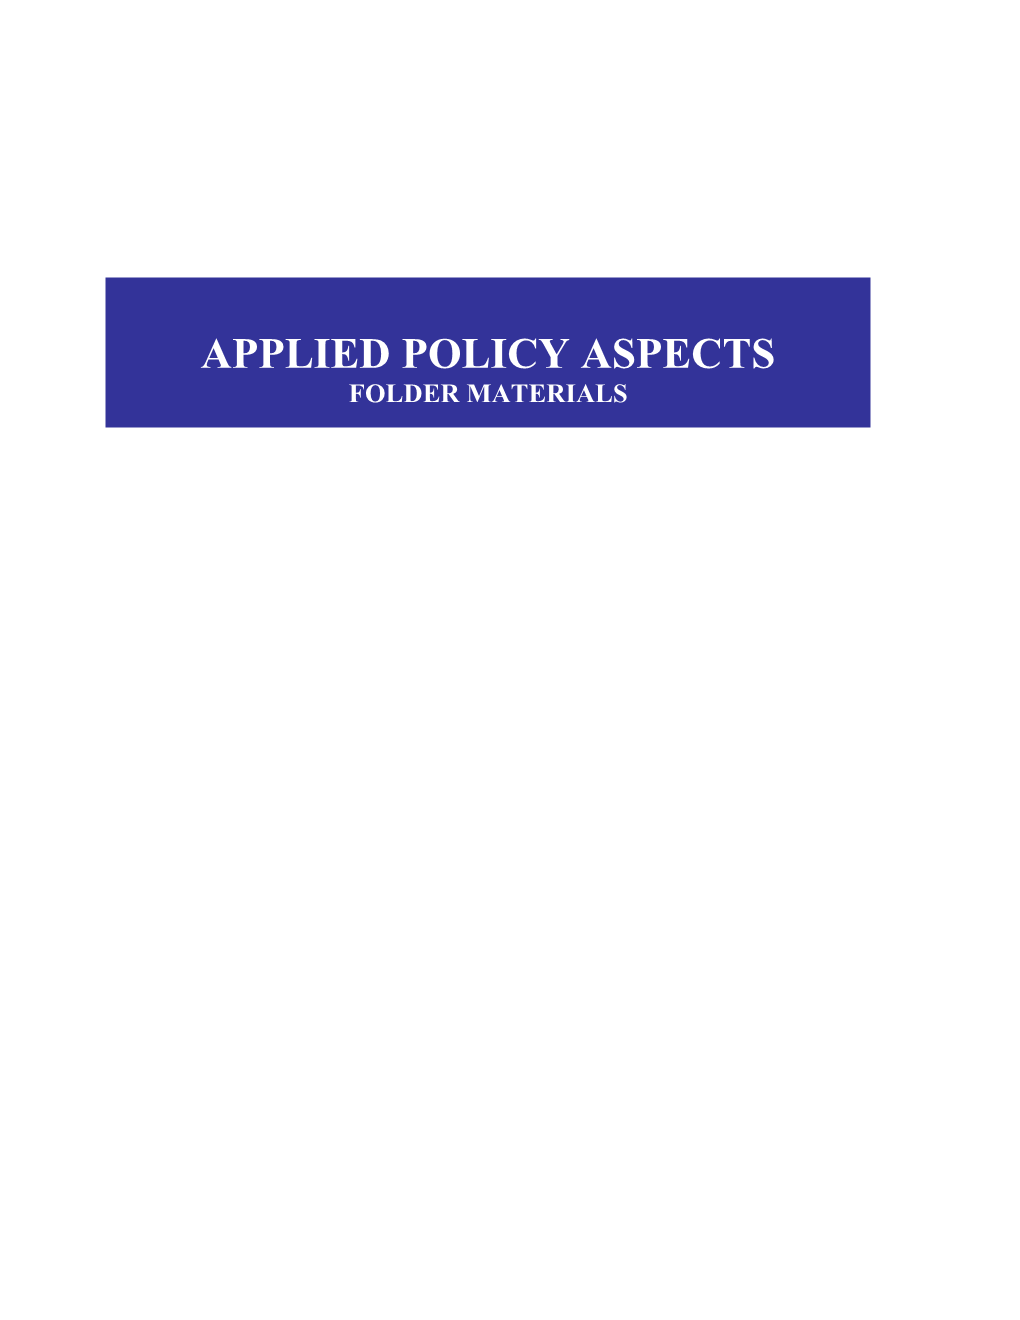 Applied Policy Aspects Folder Materials